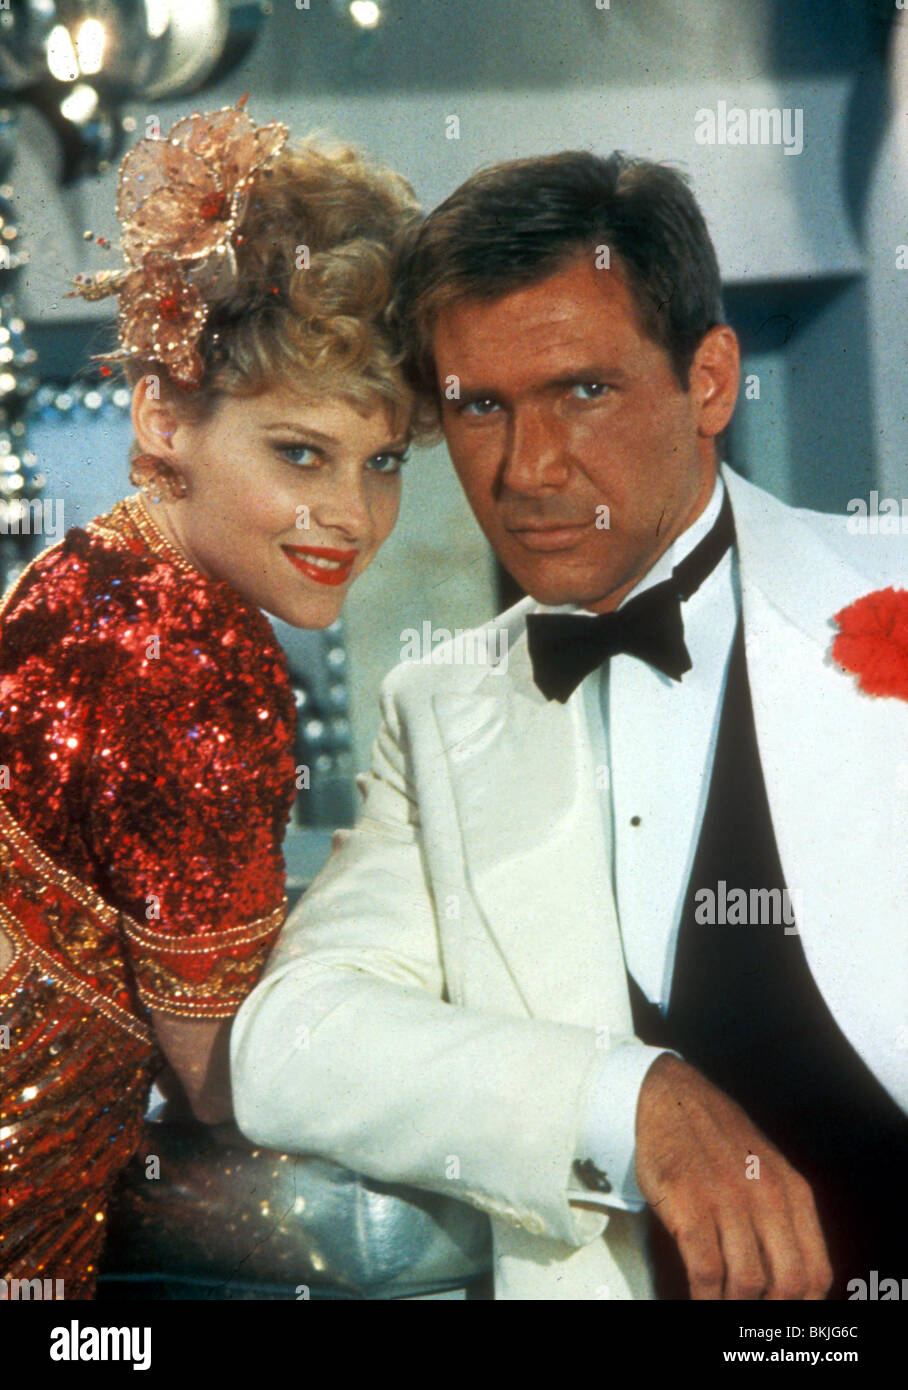 INDIANA JONES AND THE TEMPLE OF DOOM (1984) KATE CAPSHOW, HARRISON FORD INT 099 Stock Photo